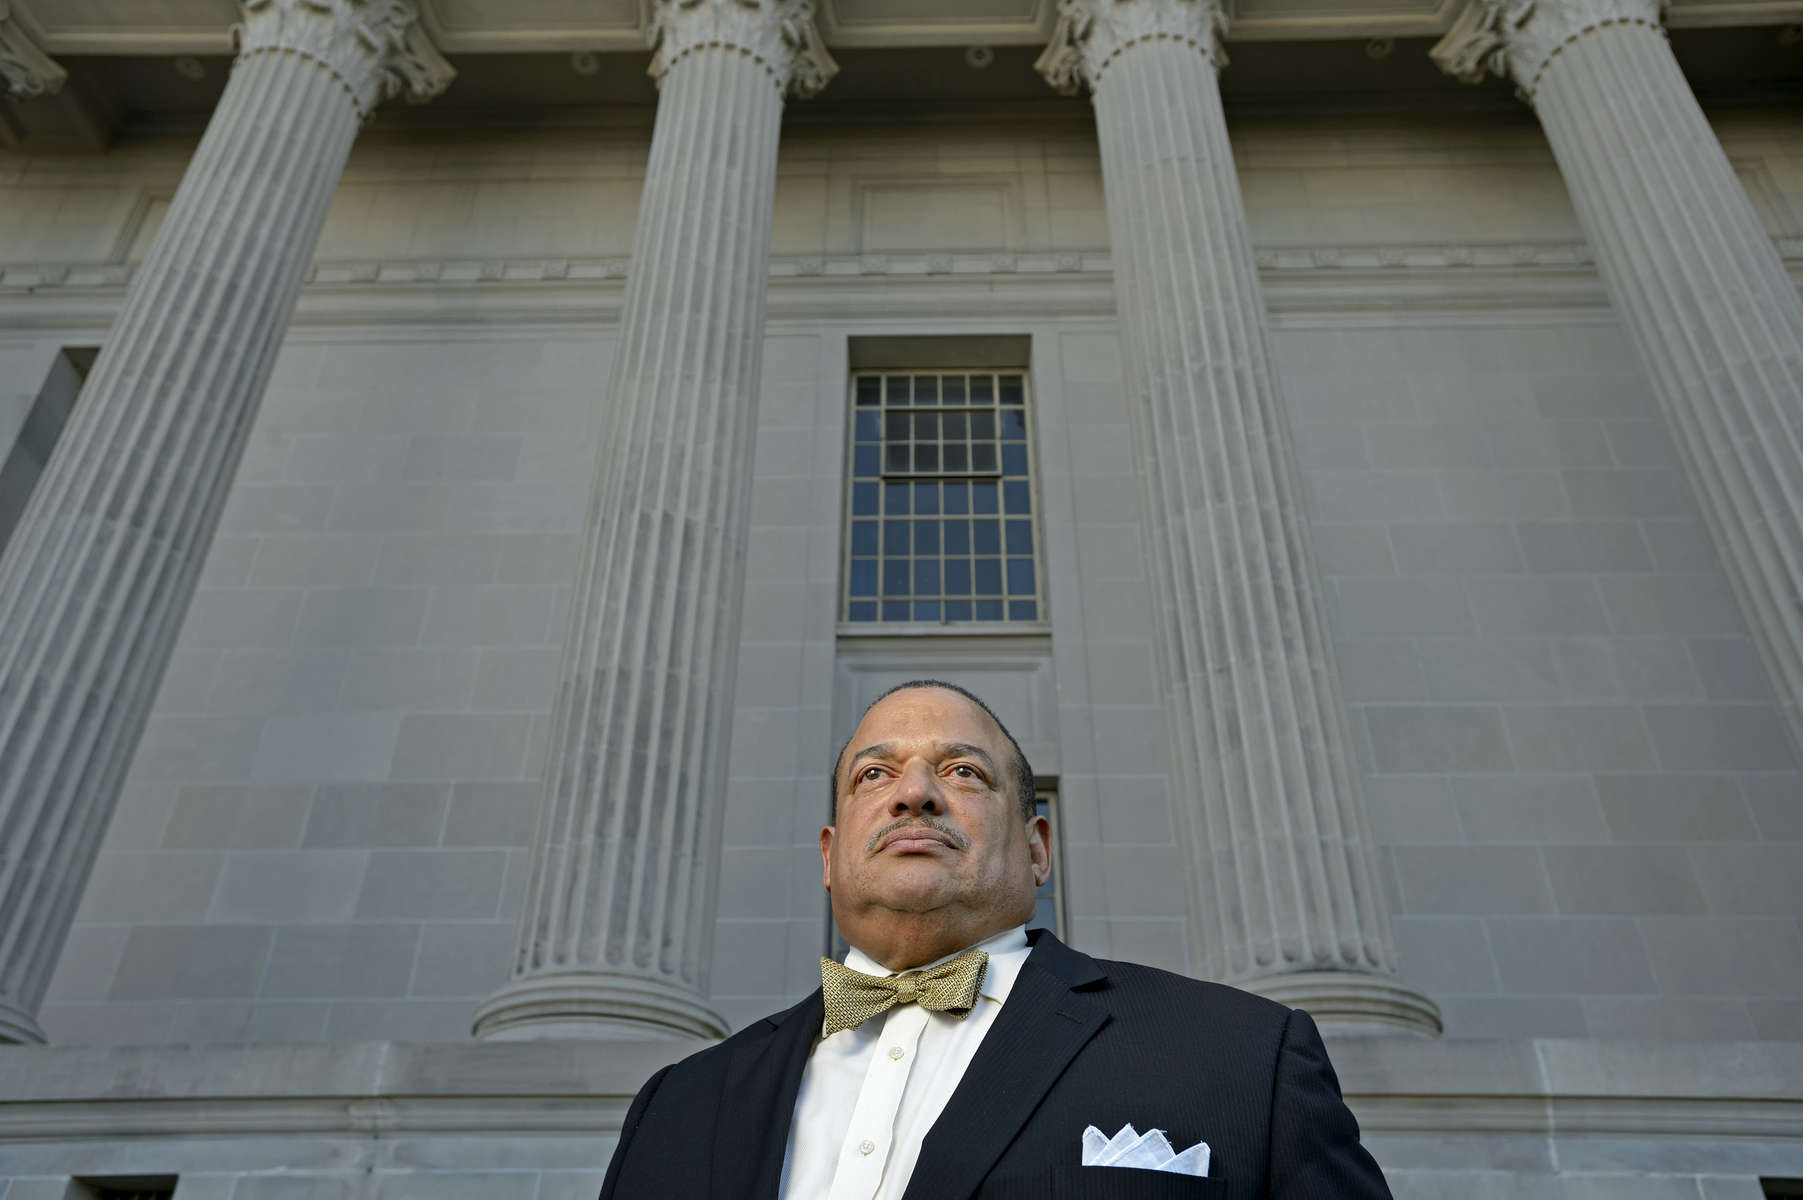 Portraits included in non-unanimous jury project that was awarded the 2019 Pulitzer Prize for Local Reporting. Defense attorney David Belfield stands for a portrait in front of the Orleans Parish Criminal District Court in New Orleans, La., Wednesday, April 18, 2018. Belfield says he would be much more willing to take cases to trial if the jury verdicts had to be unanimous.